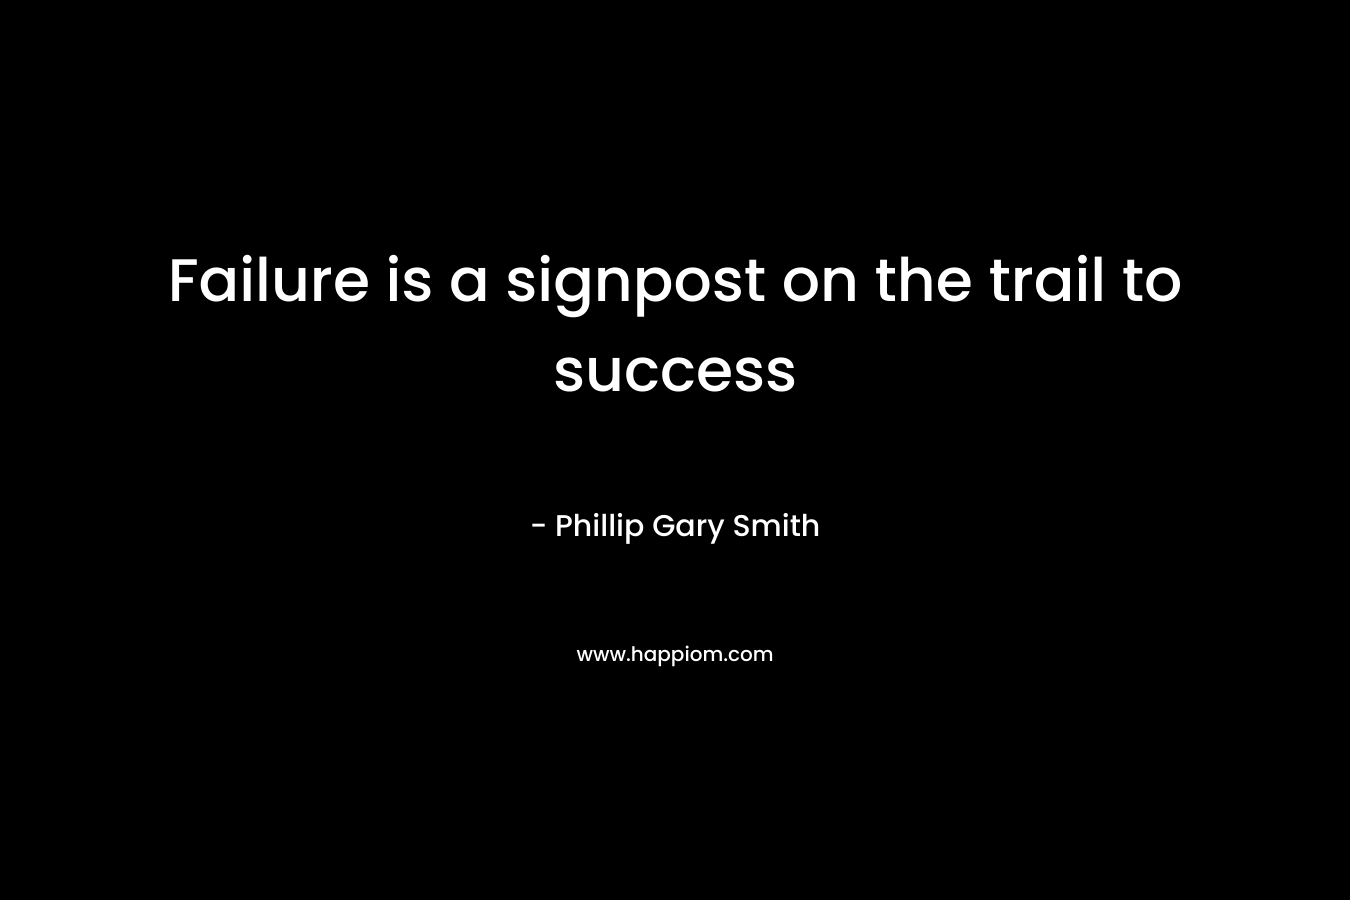 Failure is a signpost on the trail to success